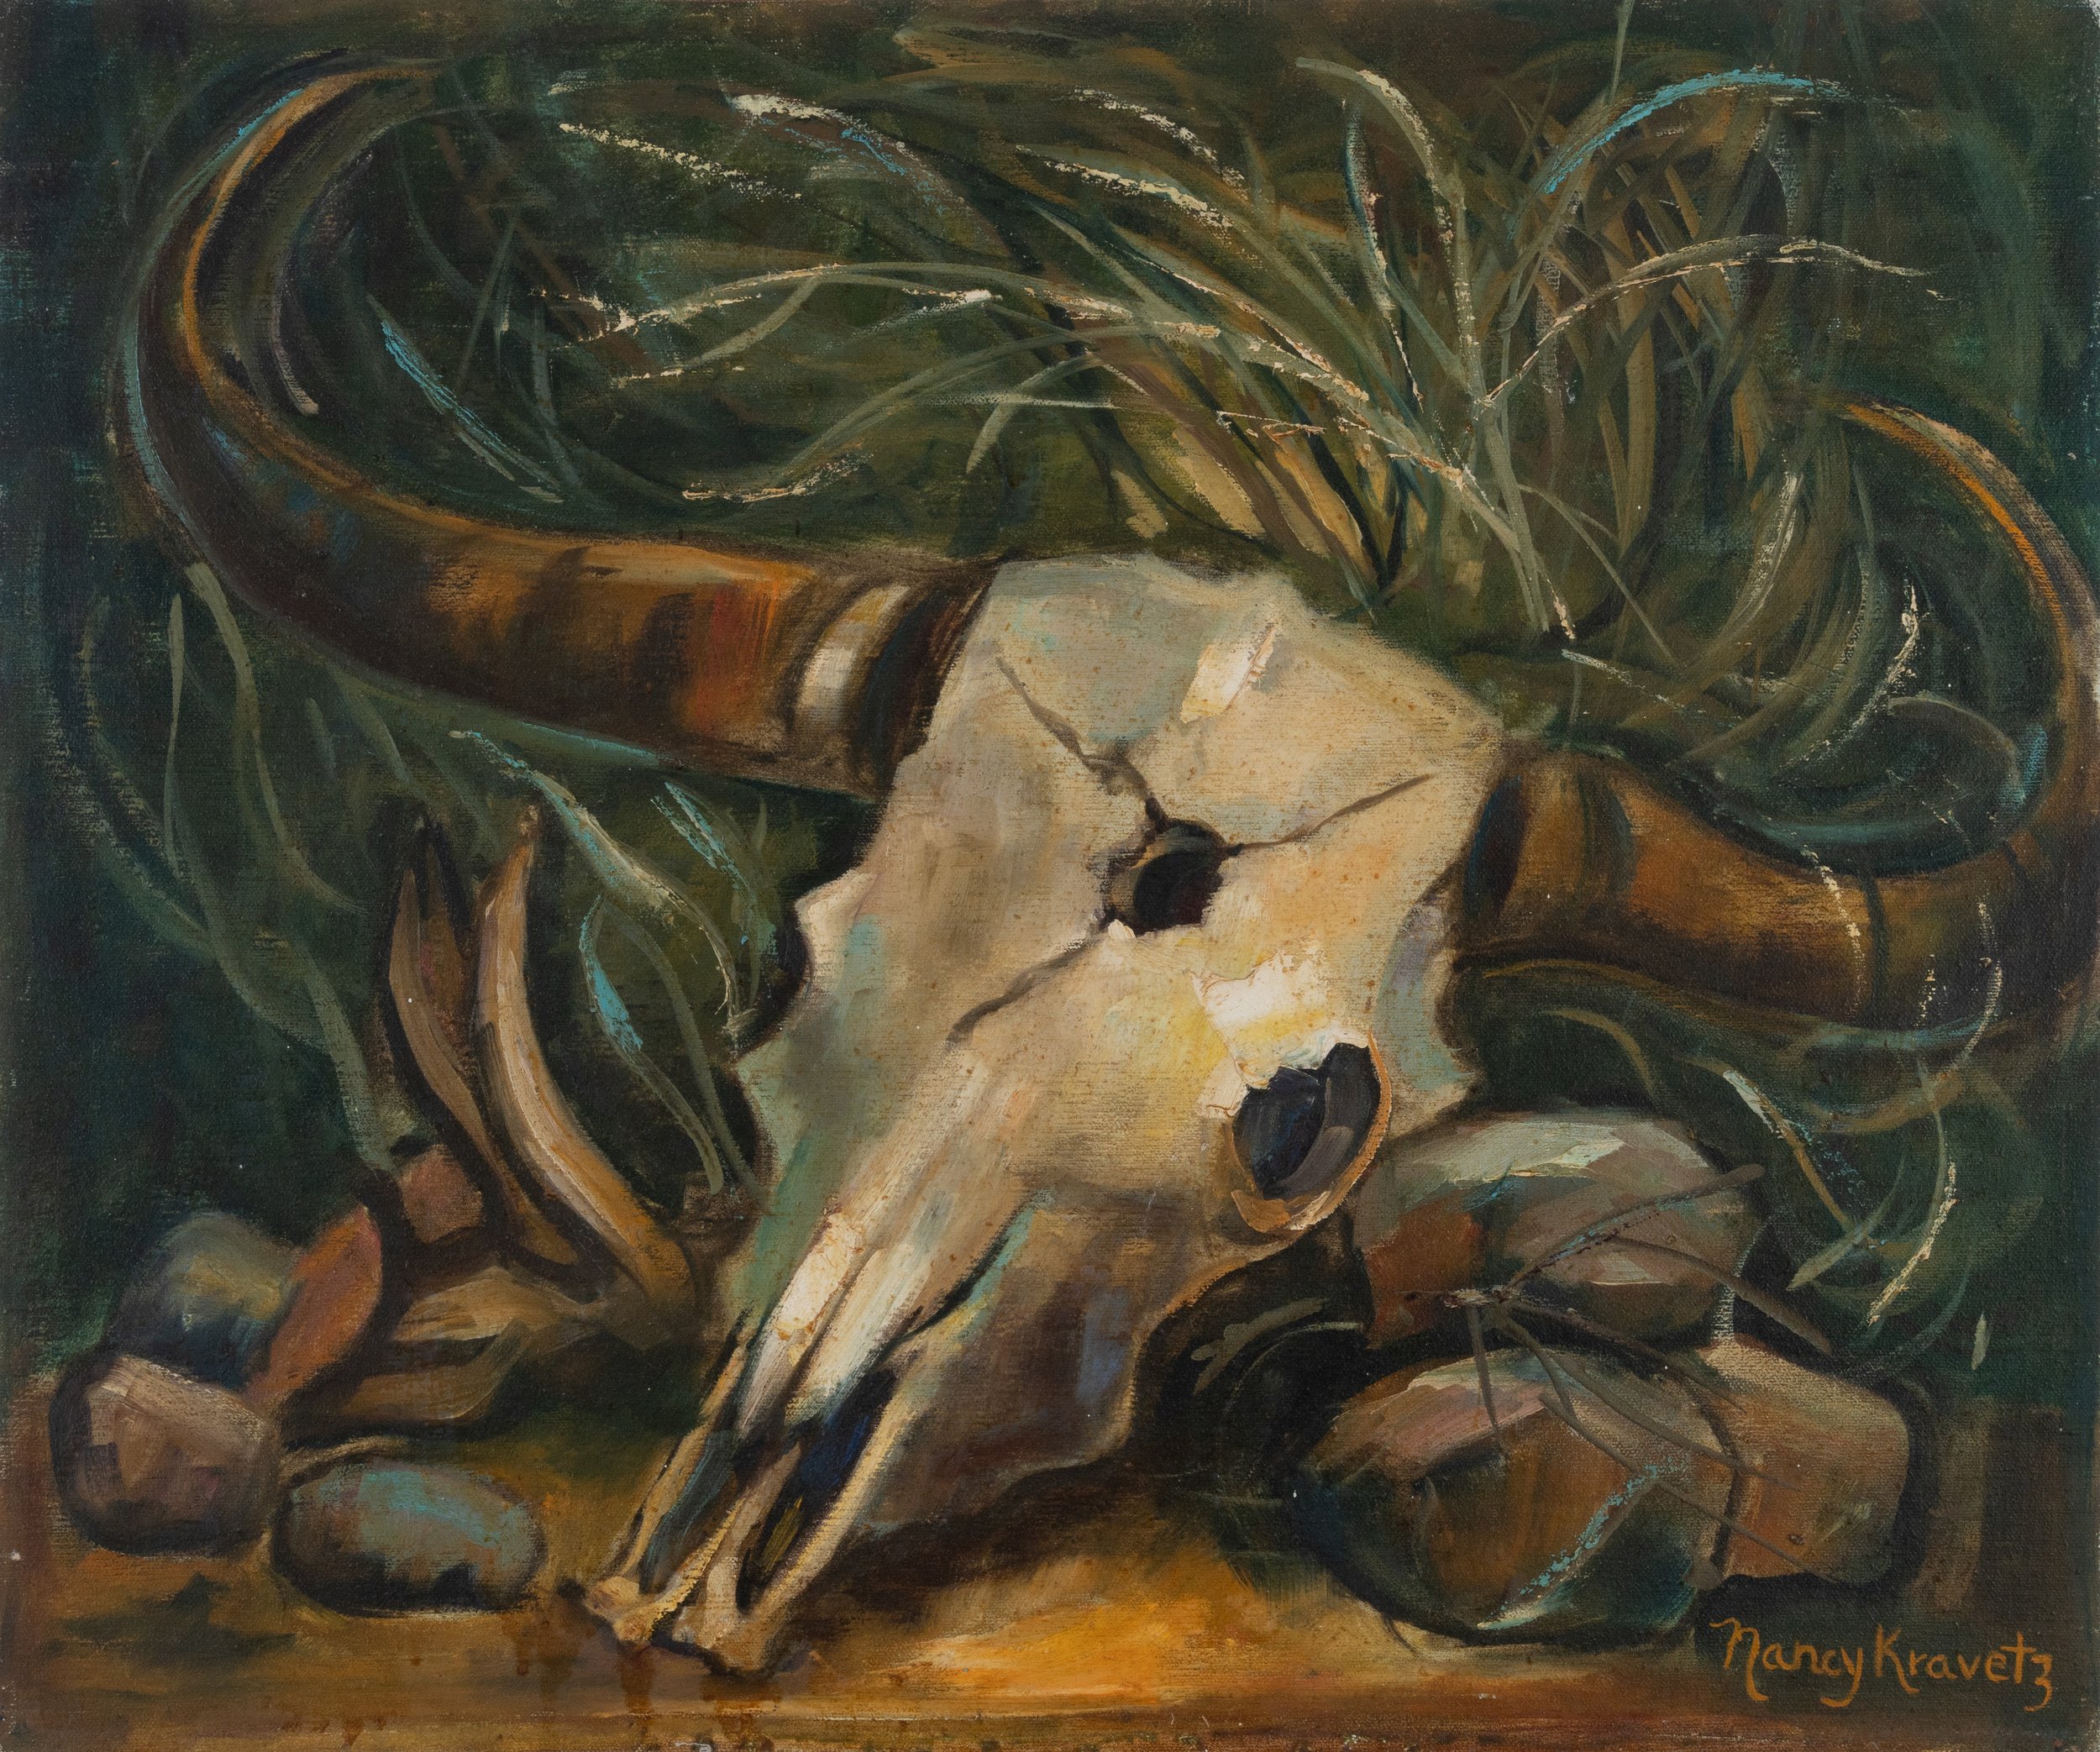 Skull and Boulders, 1969, oil on masonite, 20x24 inches